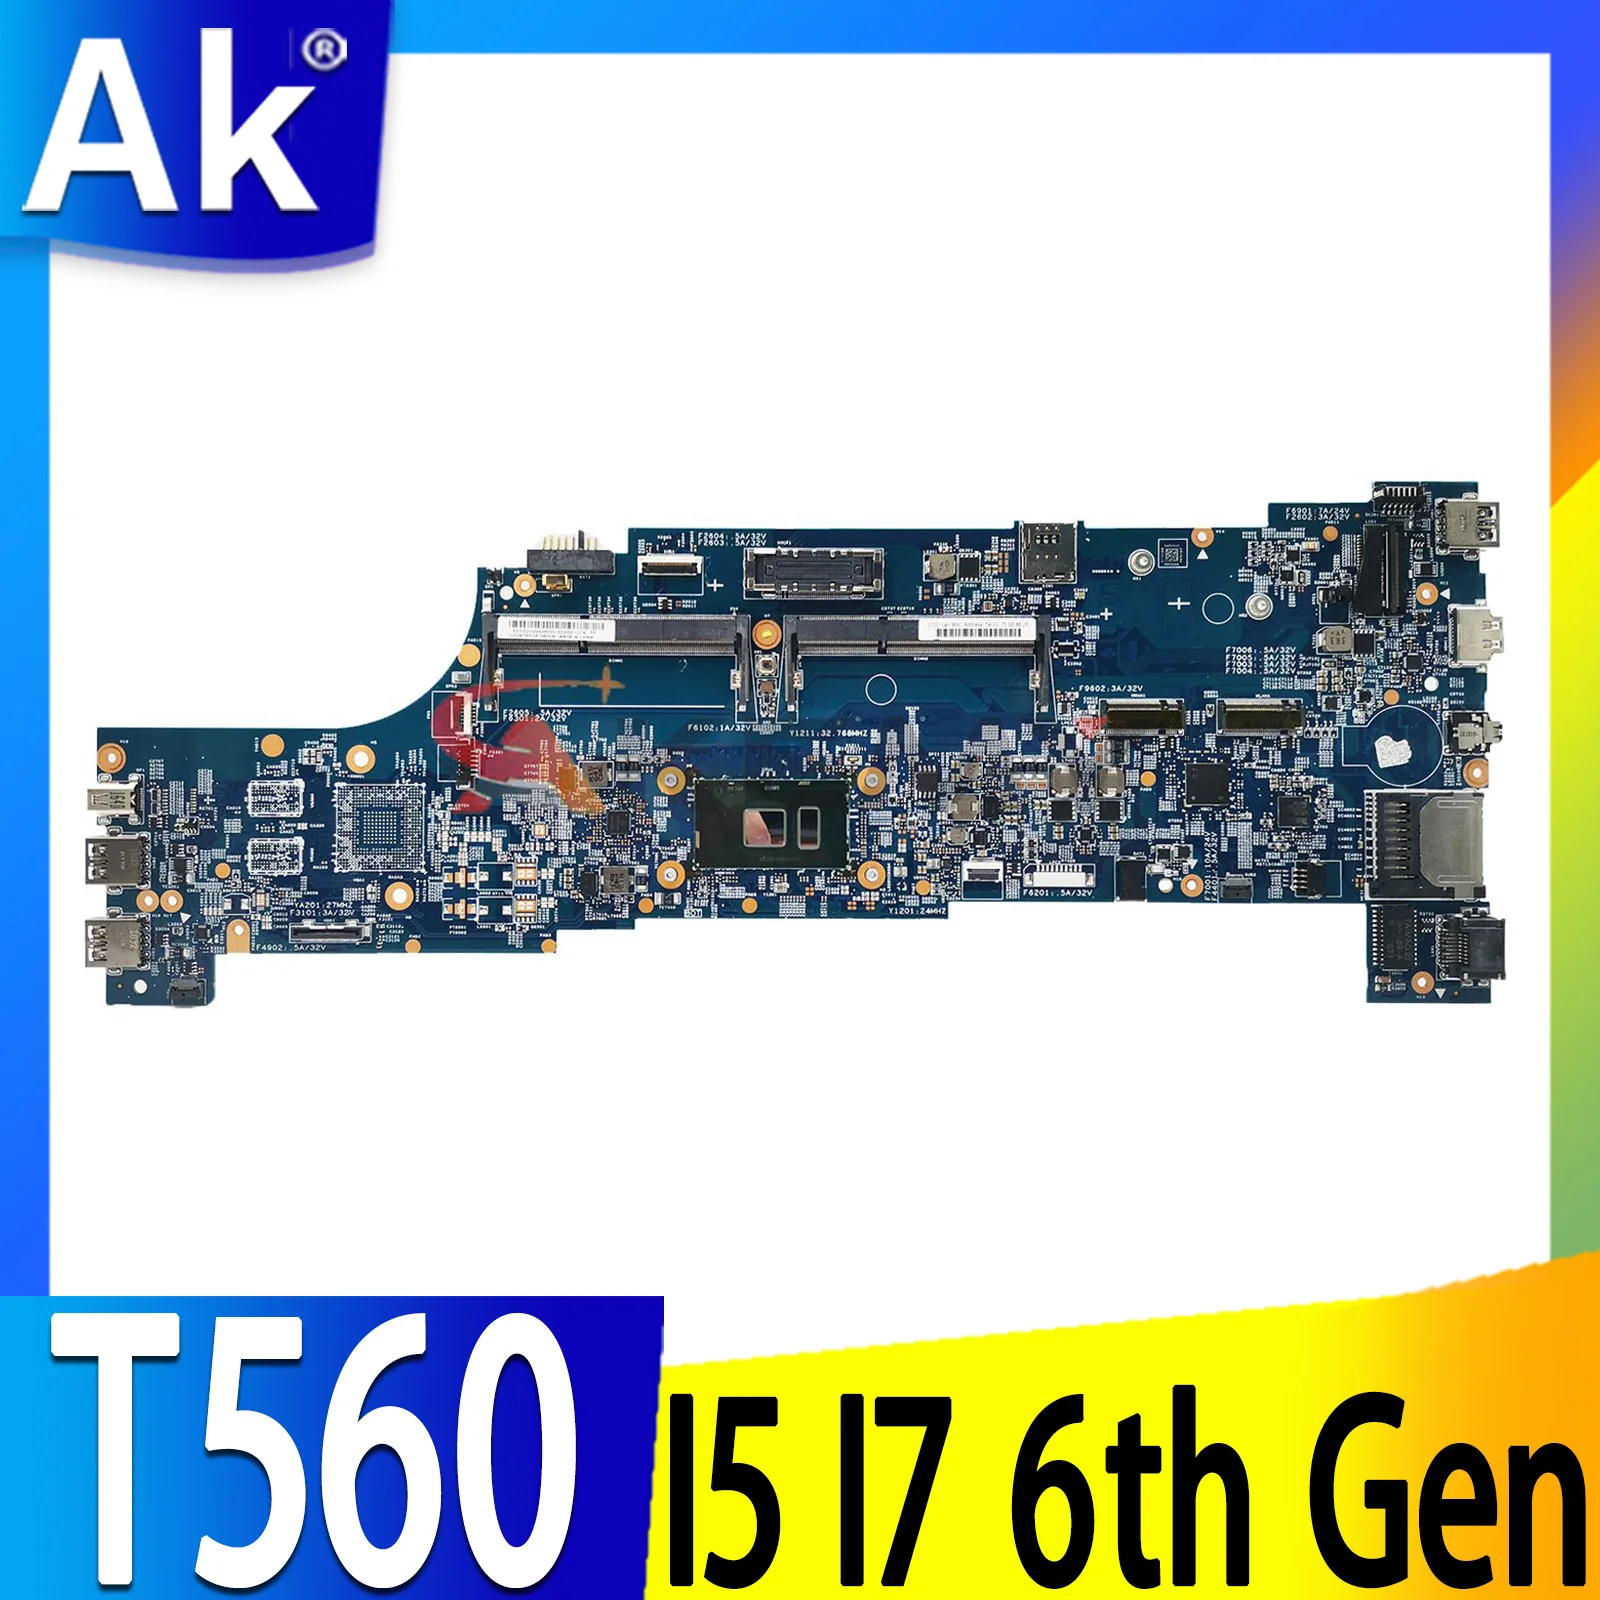 

15202-2/15202-1/15202-3 For Lenovo ThinkPad T560 P50S Laptop motherboard with I5 I7 6th Gen CPU 100% test work